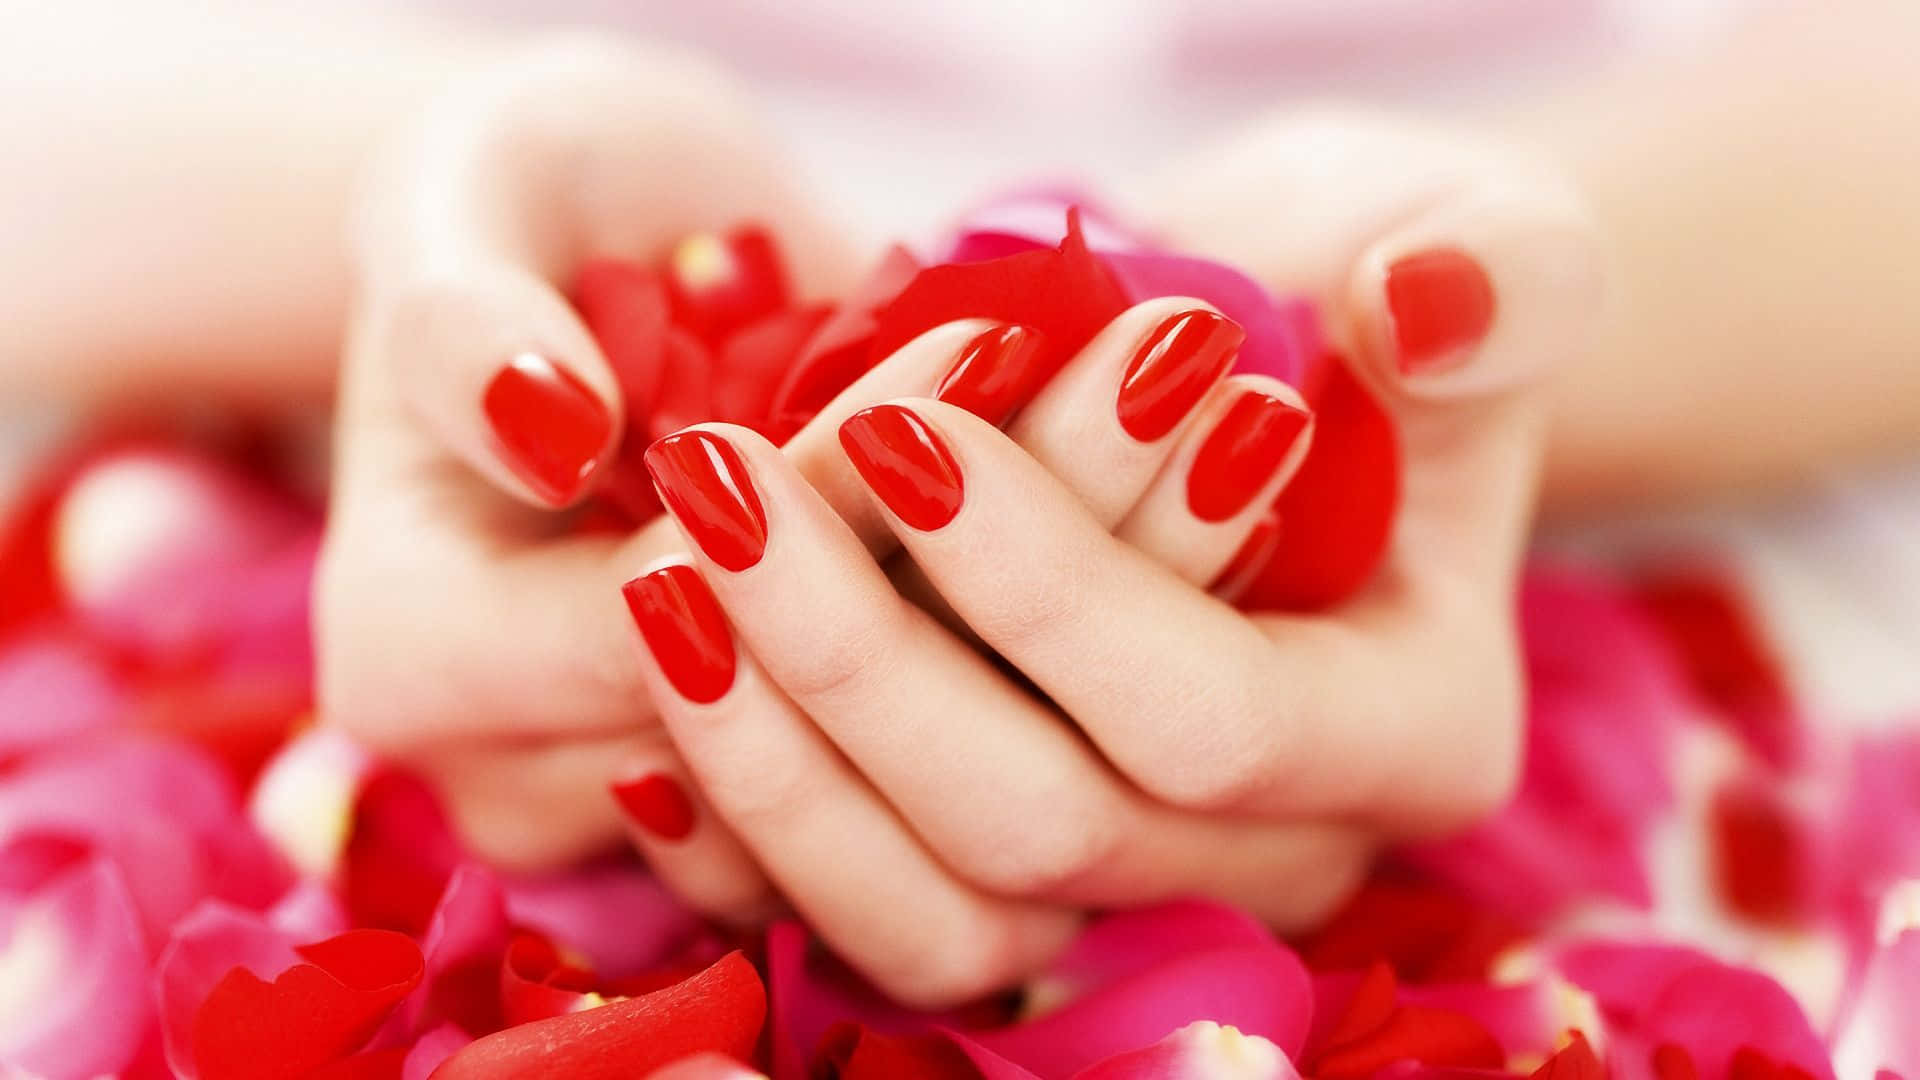 Chic and Stylish Gradient Nail Design Wallpaper